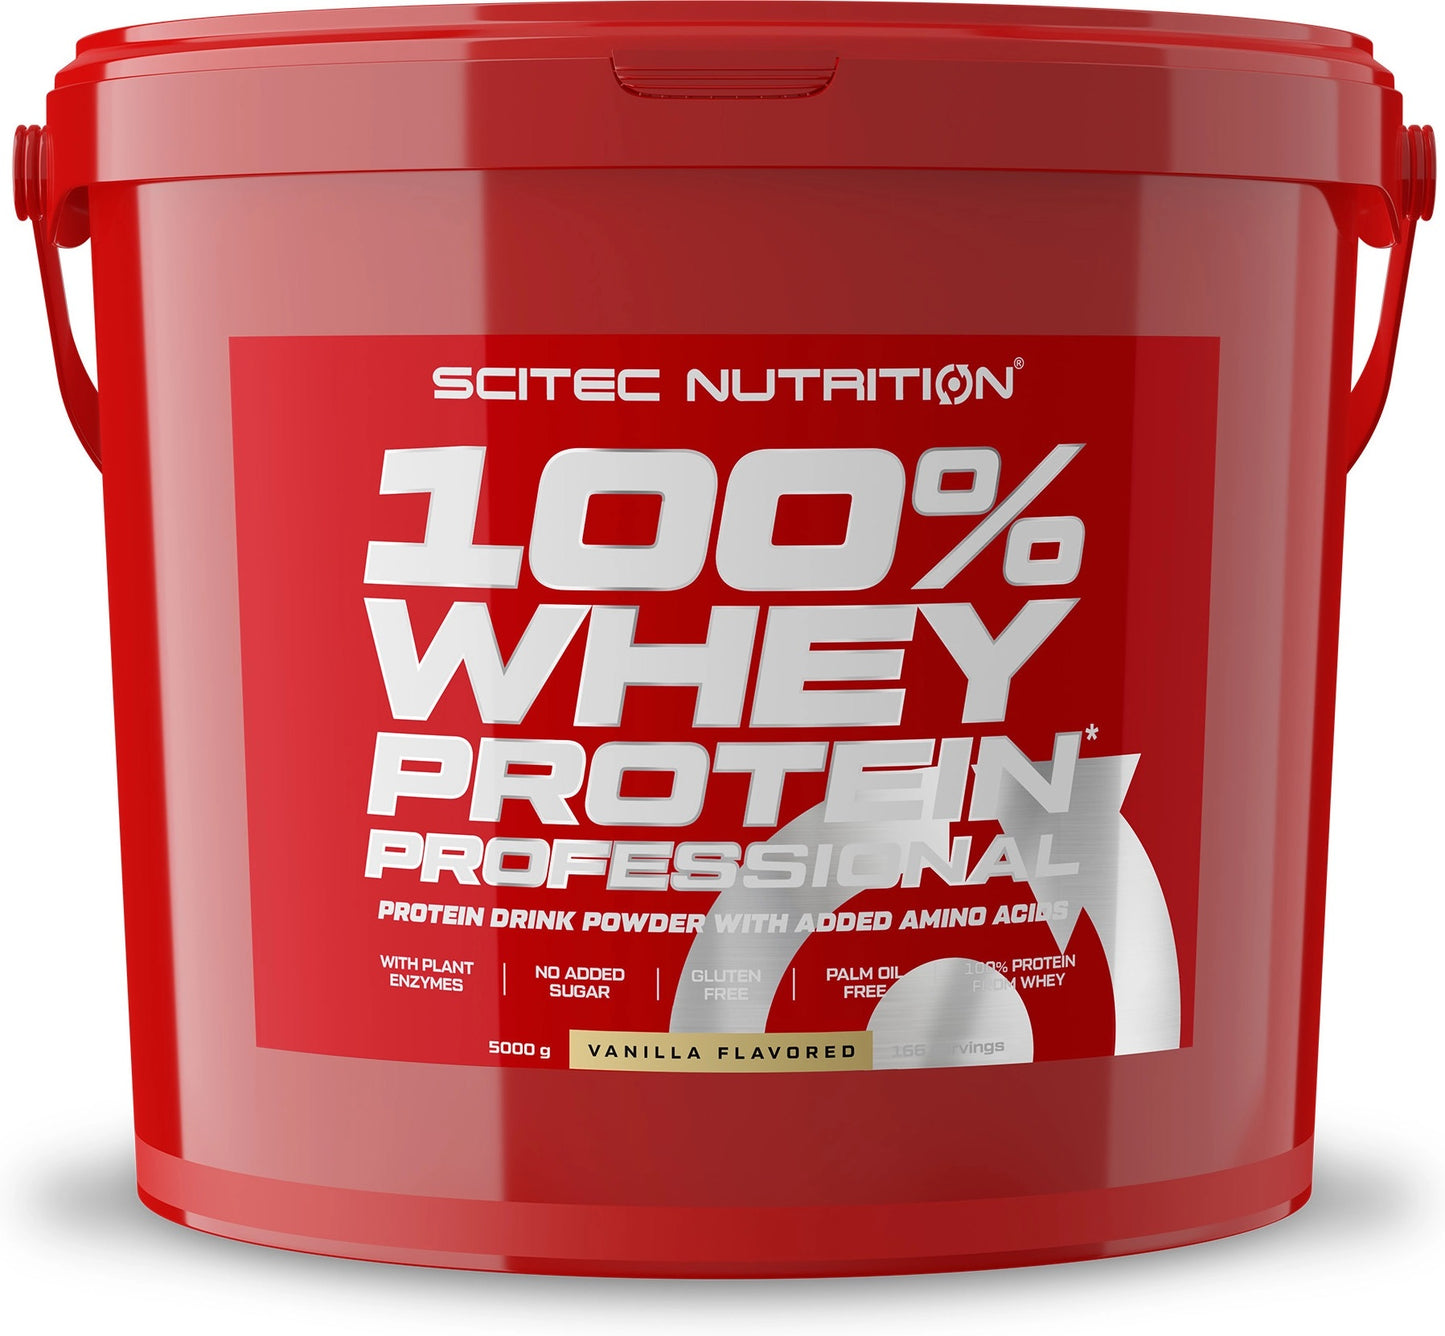 SCITEC NUTRITION 100% WHEY PROTEIN PROFESSIONAL 5 KG